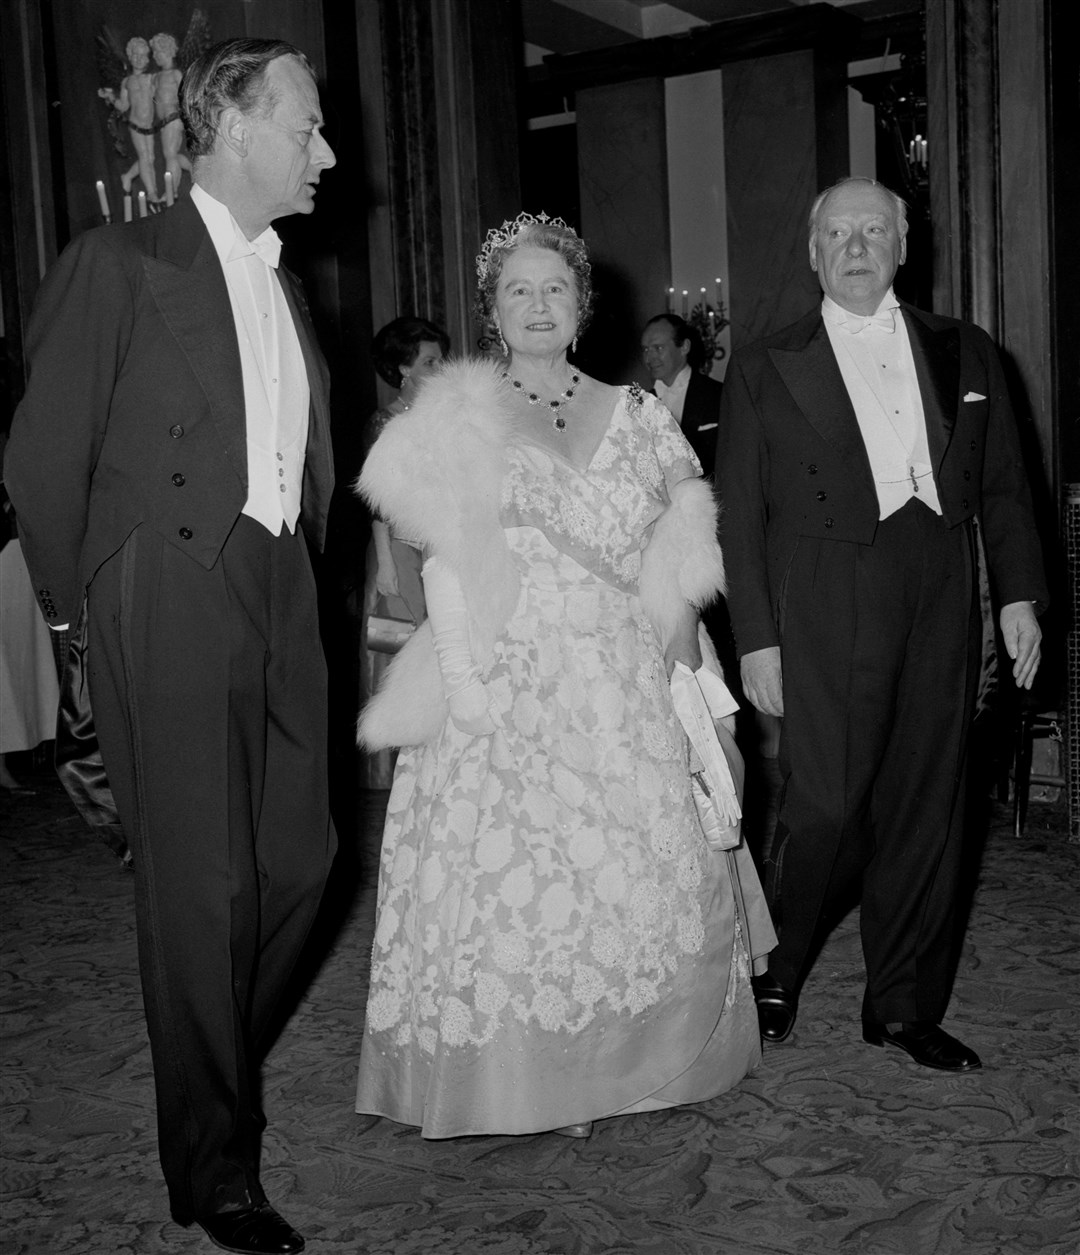 Sir David Webster (right) and the Earl of Drogheda (left) escort the Queen Mother to the Royal Box at the Royal Opera House (PA)